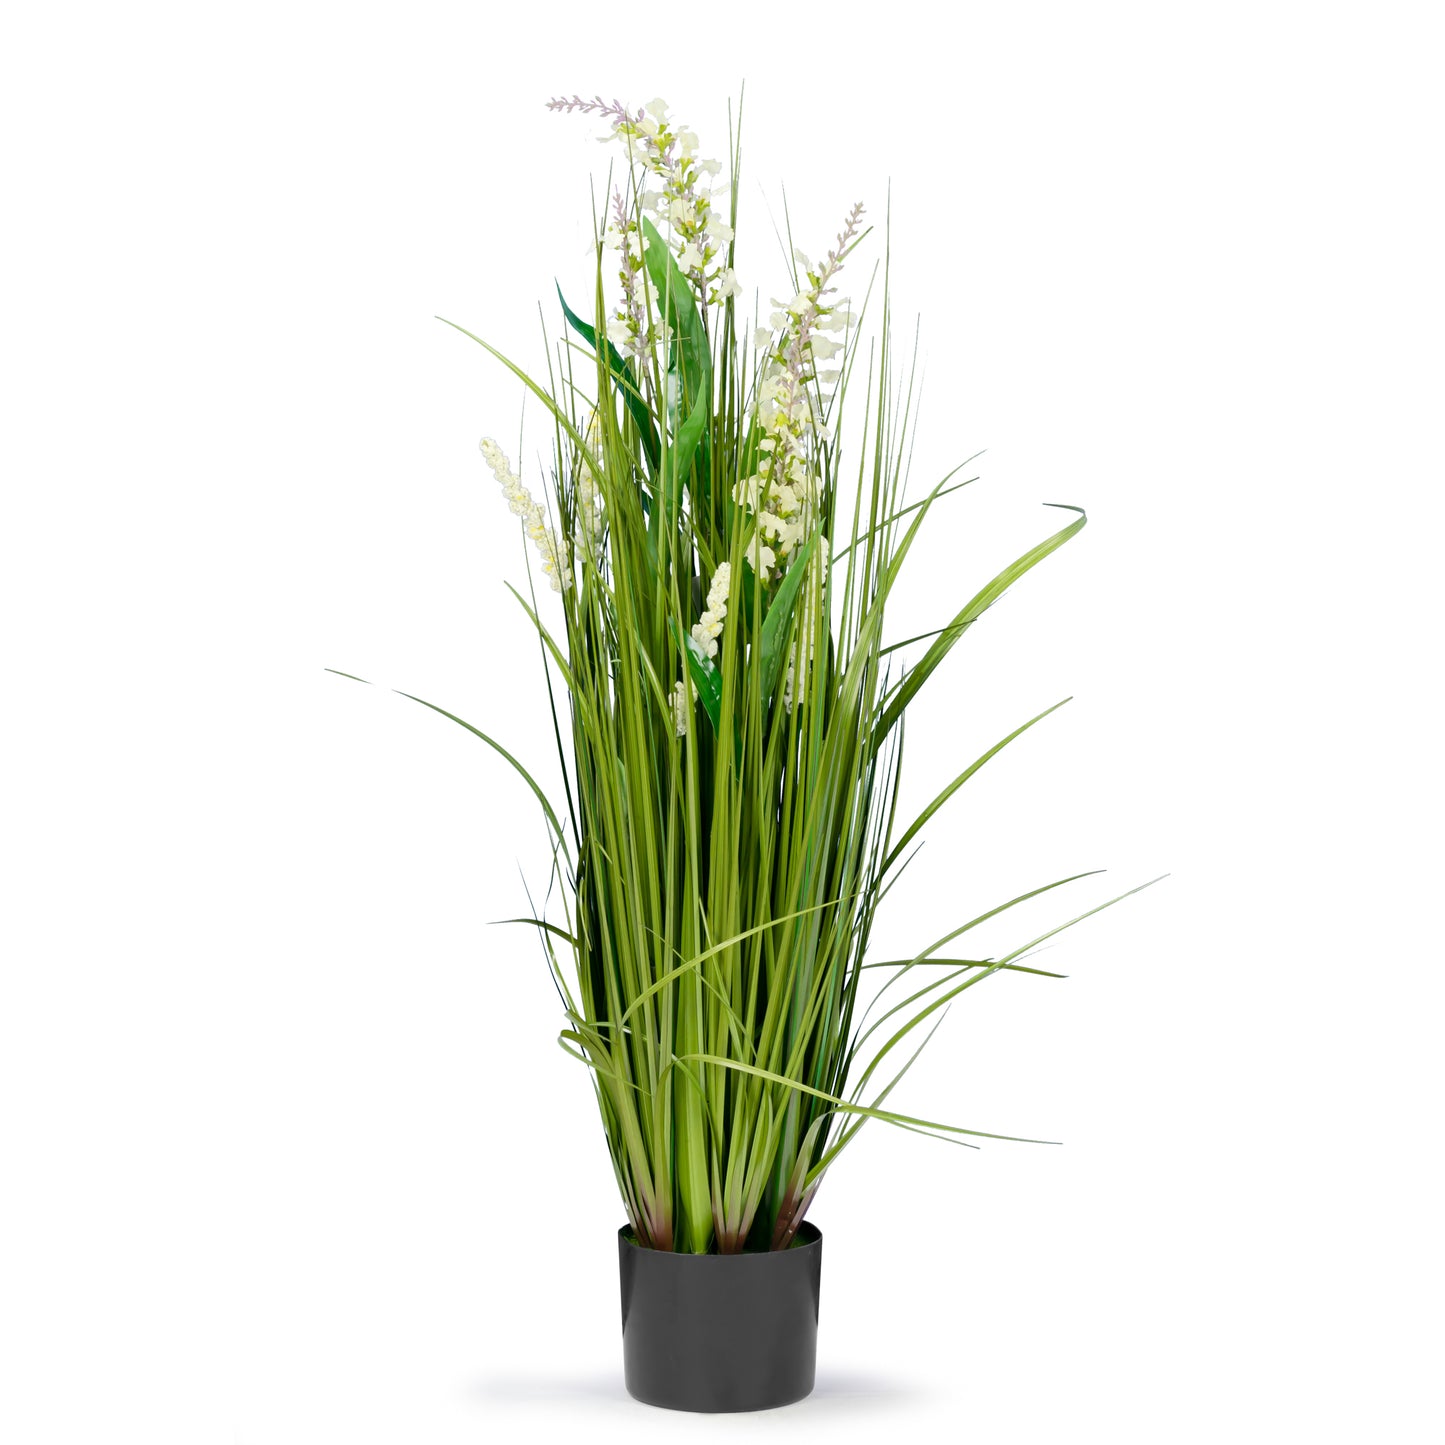 3 Feet High Artificial Reed with White Snapdragon Similar Flowers